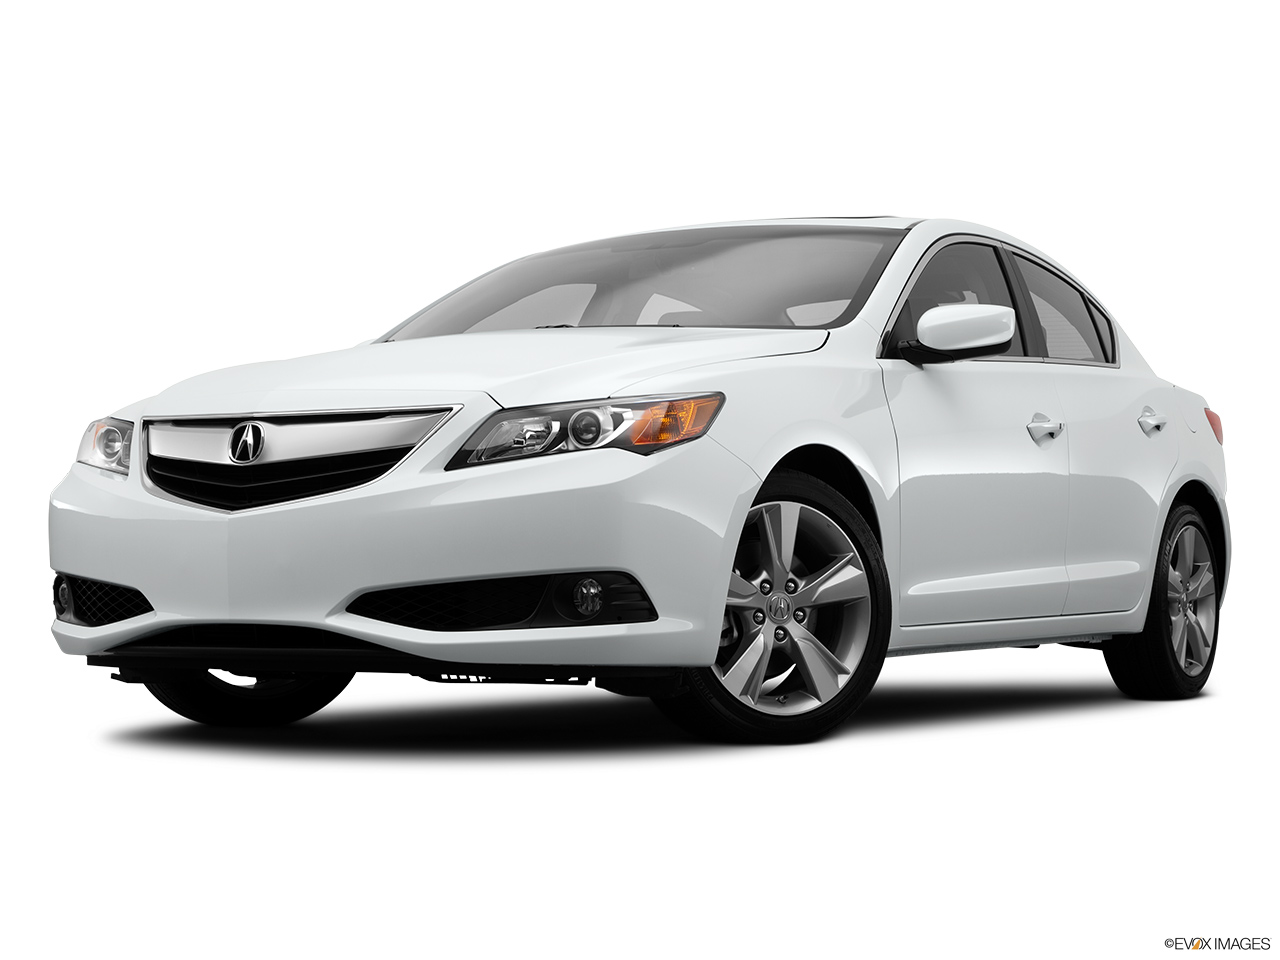 2015 Acura ILX 6-Speed Manual Front angle view, low wide perspective. 